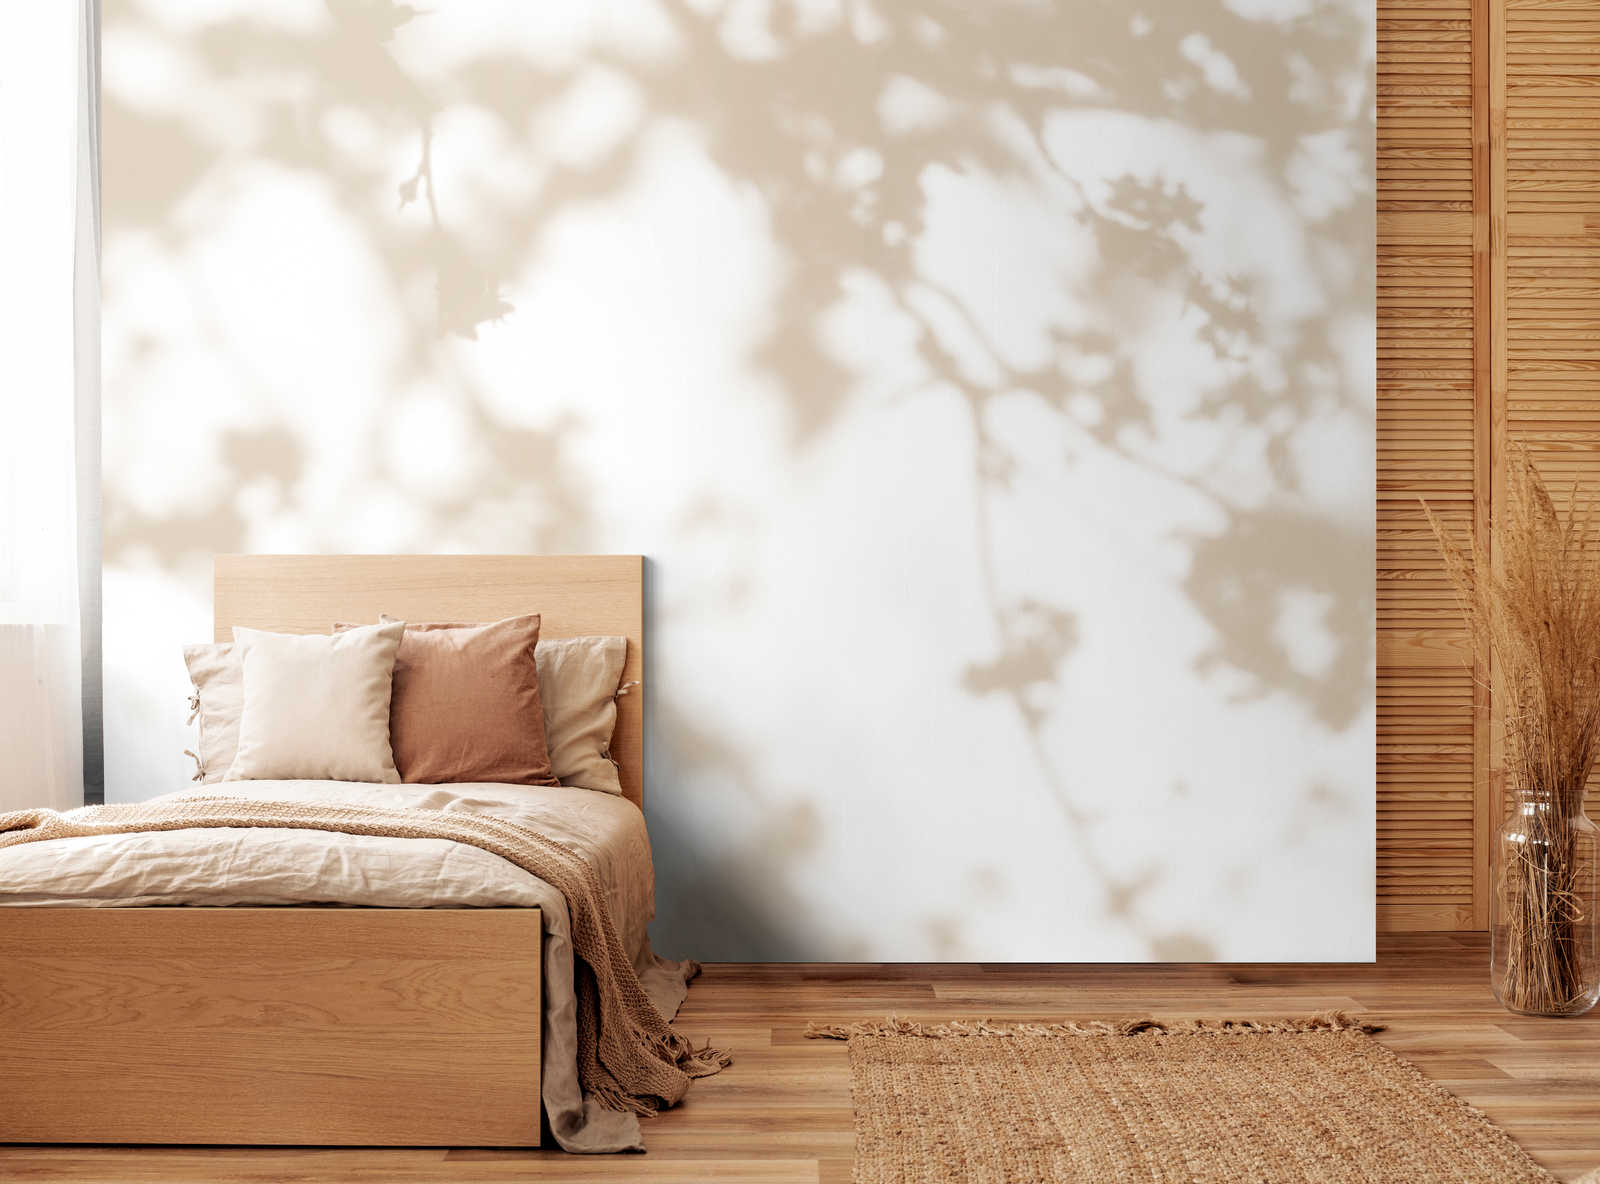             Light Room 3 - nature shadow mural in beige & white
        